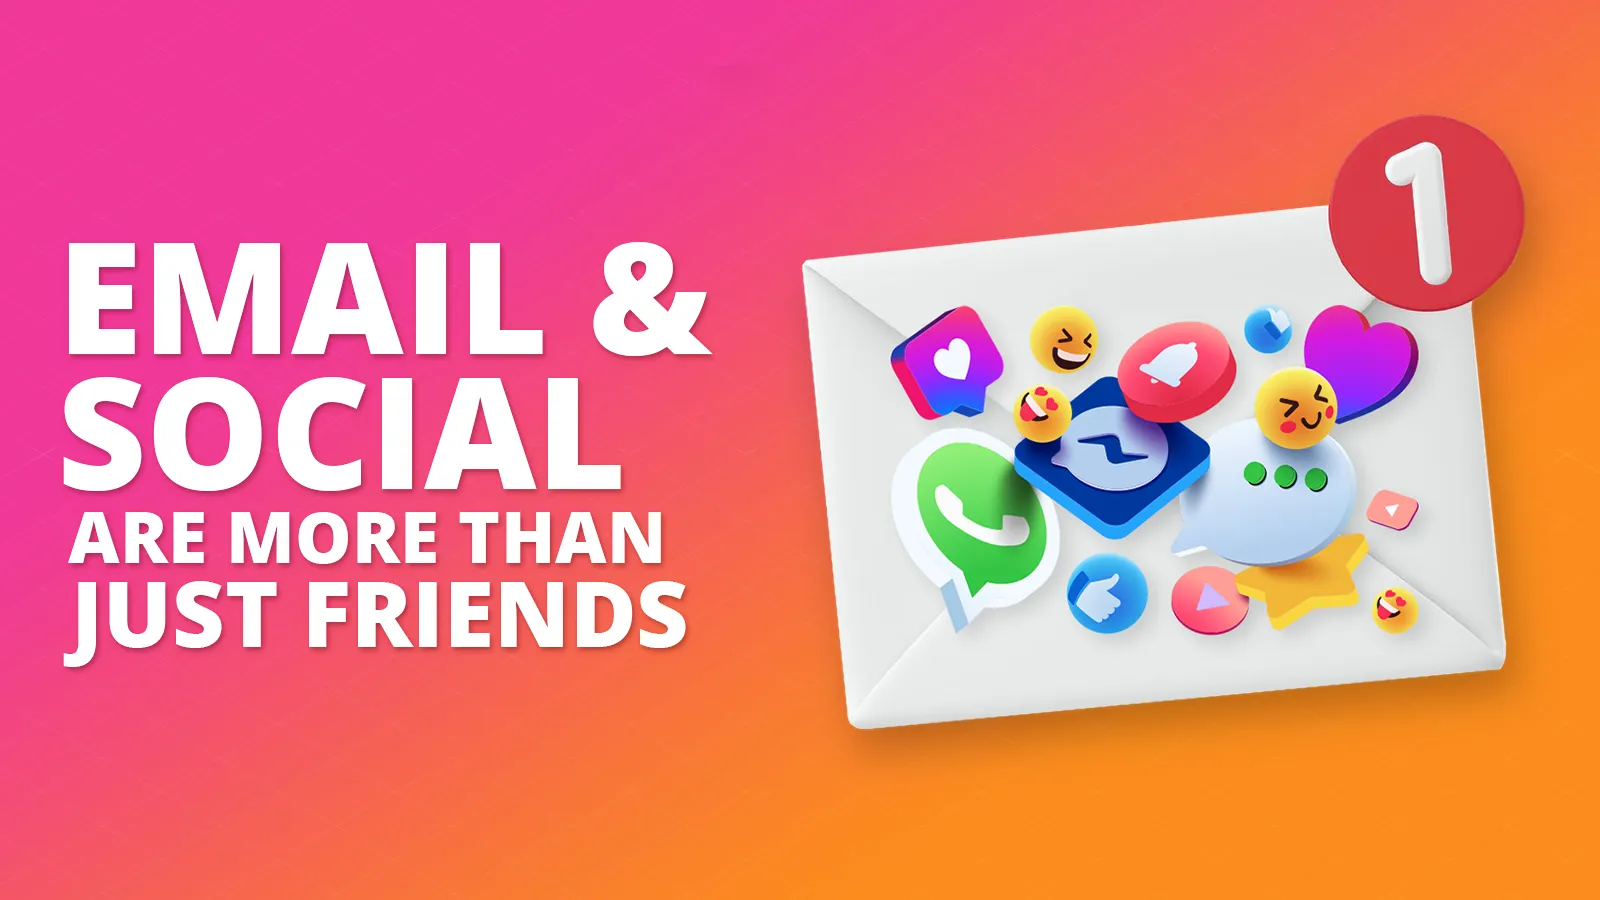 Email and social are more than just friends